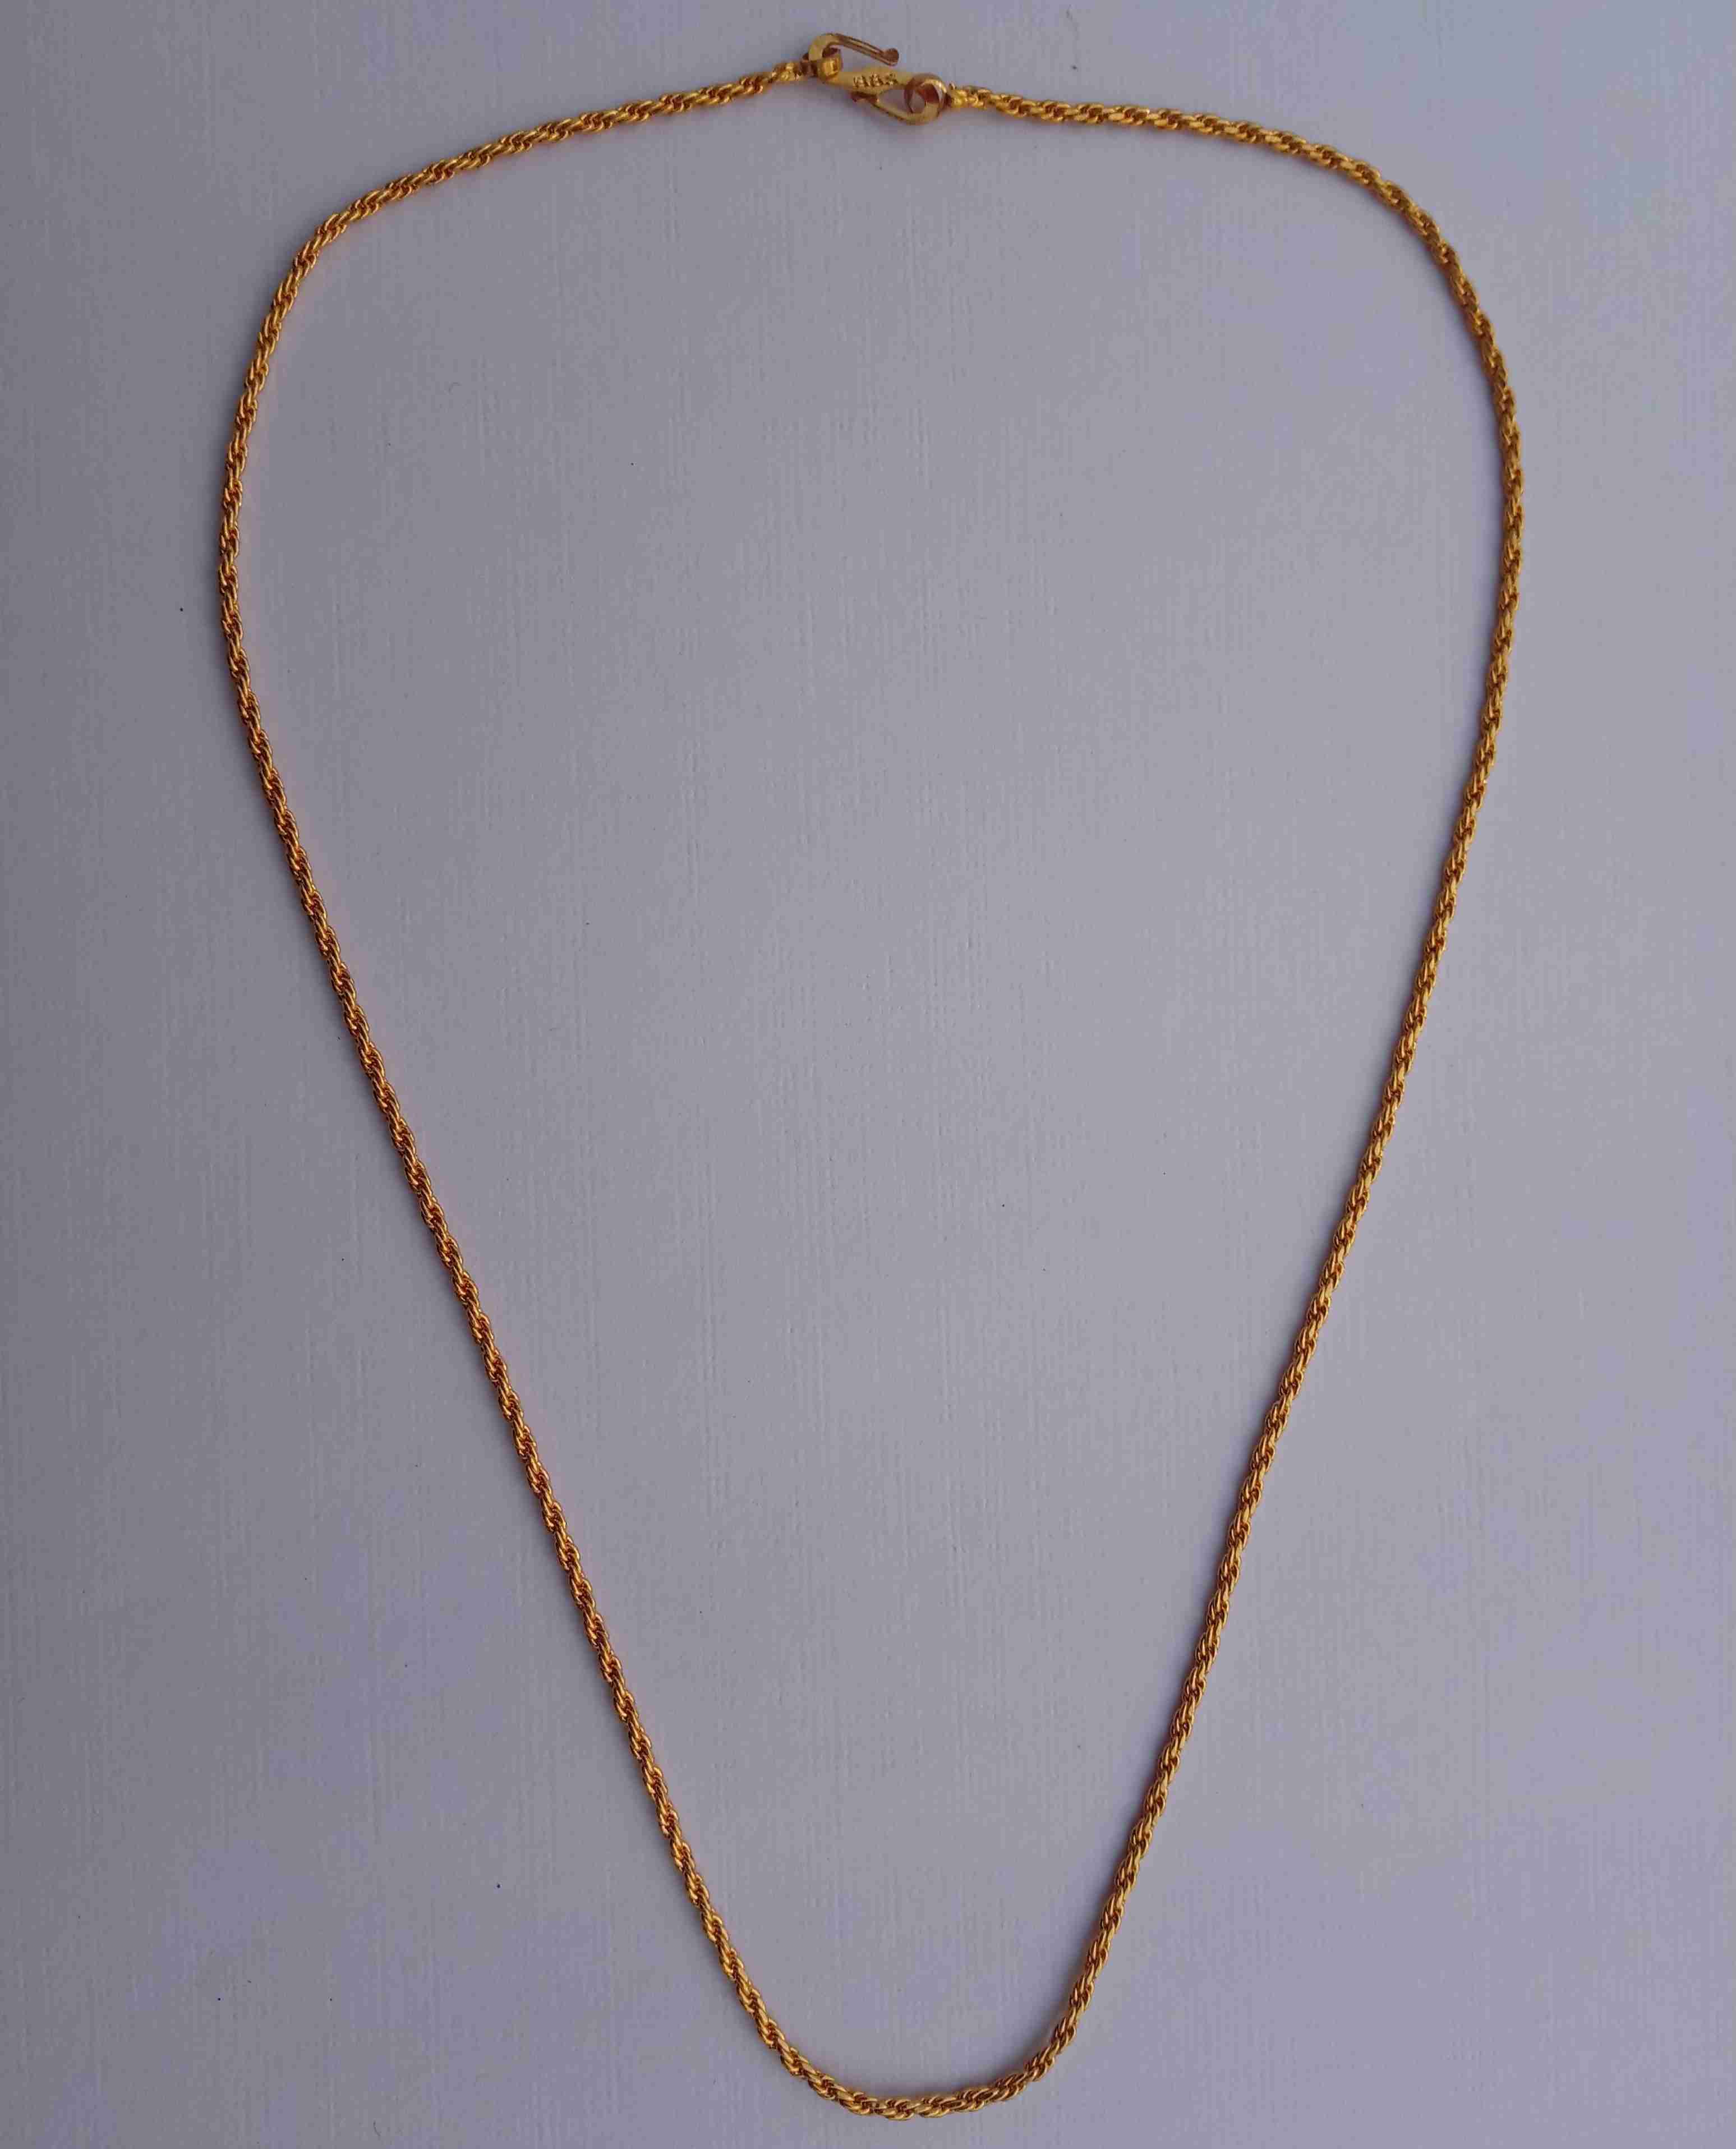 Gold Plated Twisted Necklace Chain